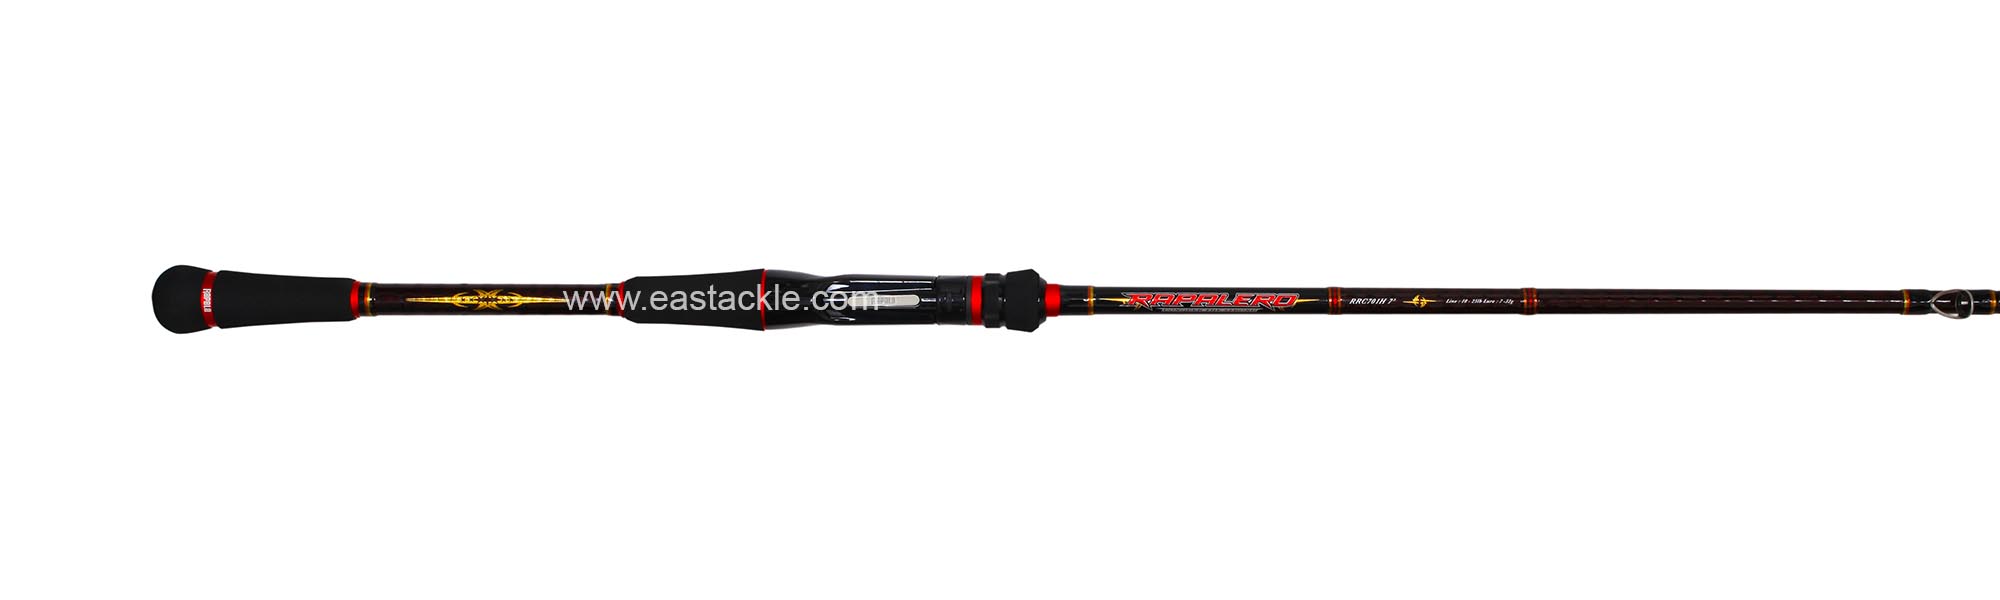 Rapala - 2018 Rapalero - RRC701H - Bait Casting Rod - Butt to Stripper Guide (Top View) | Eastackle